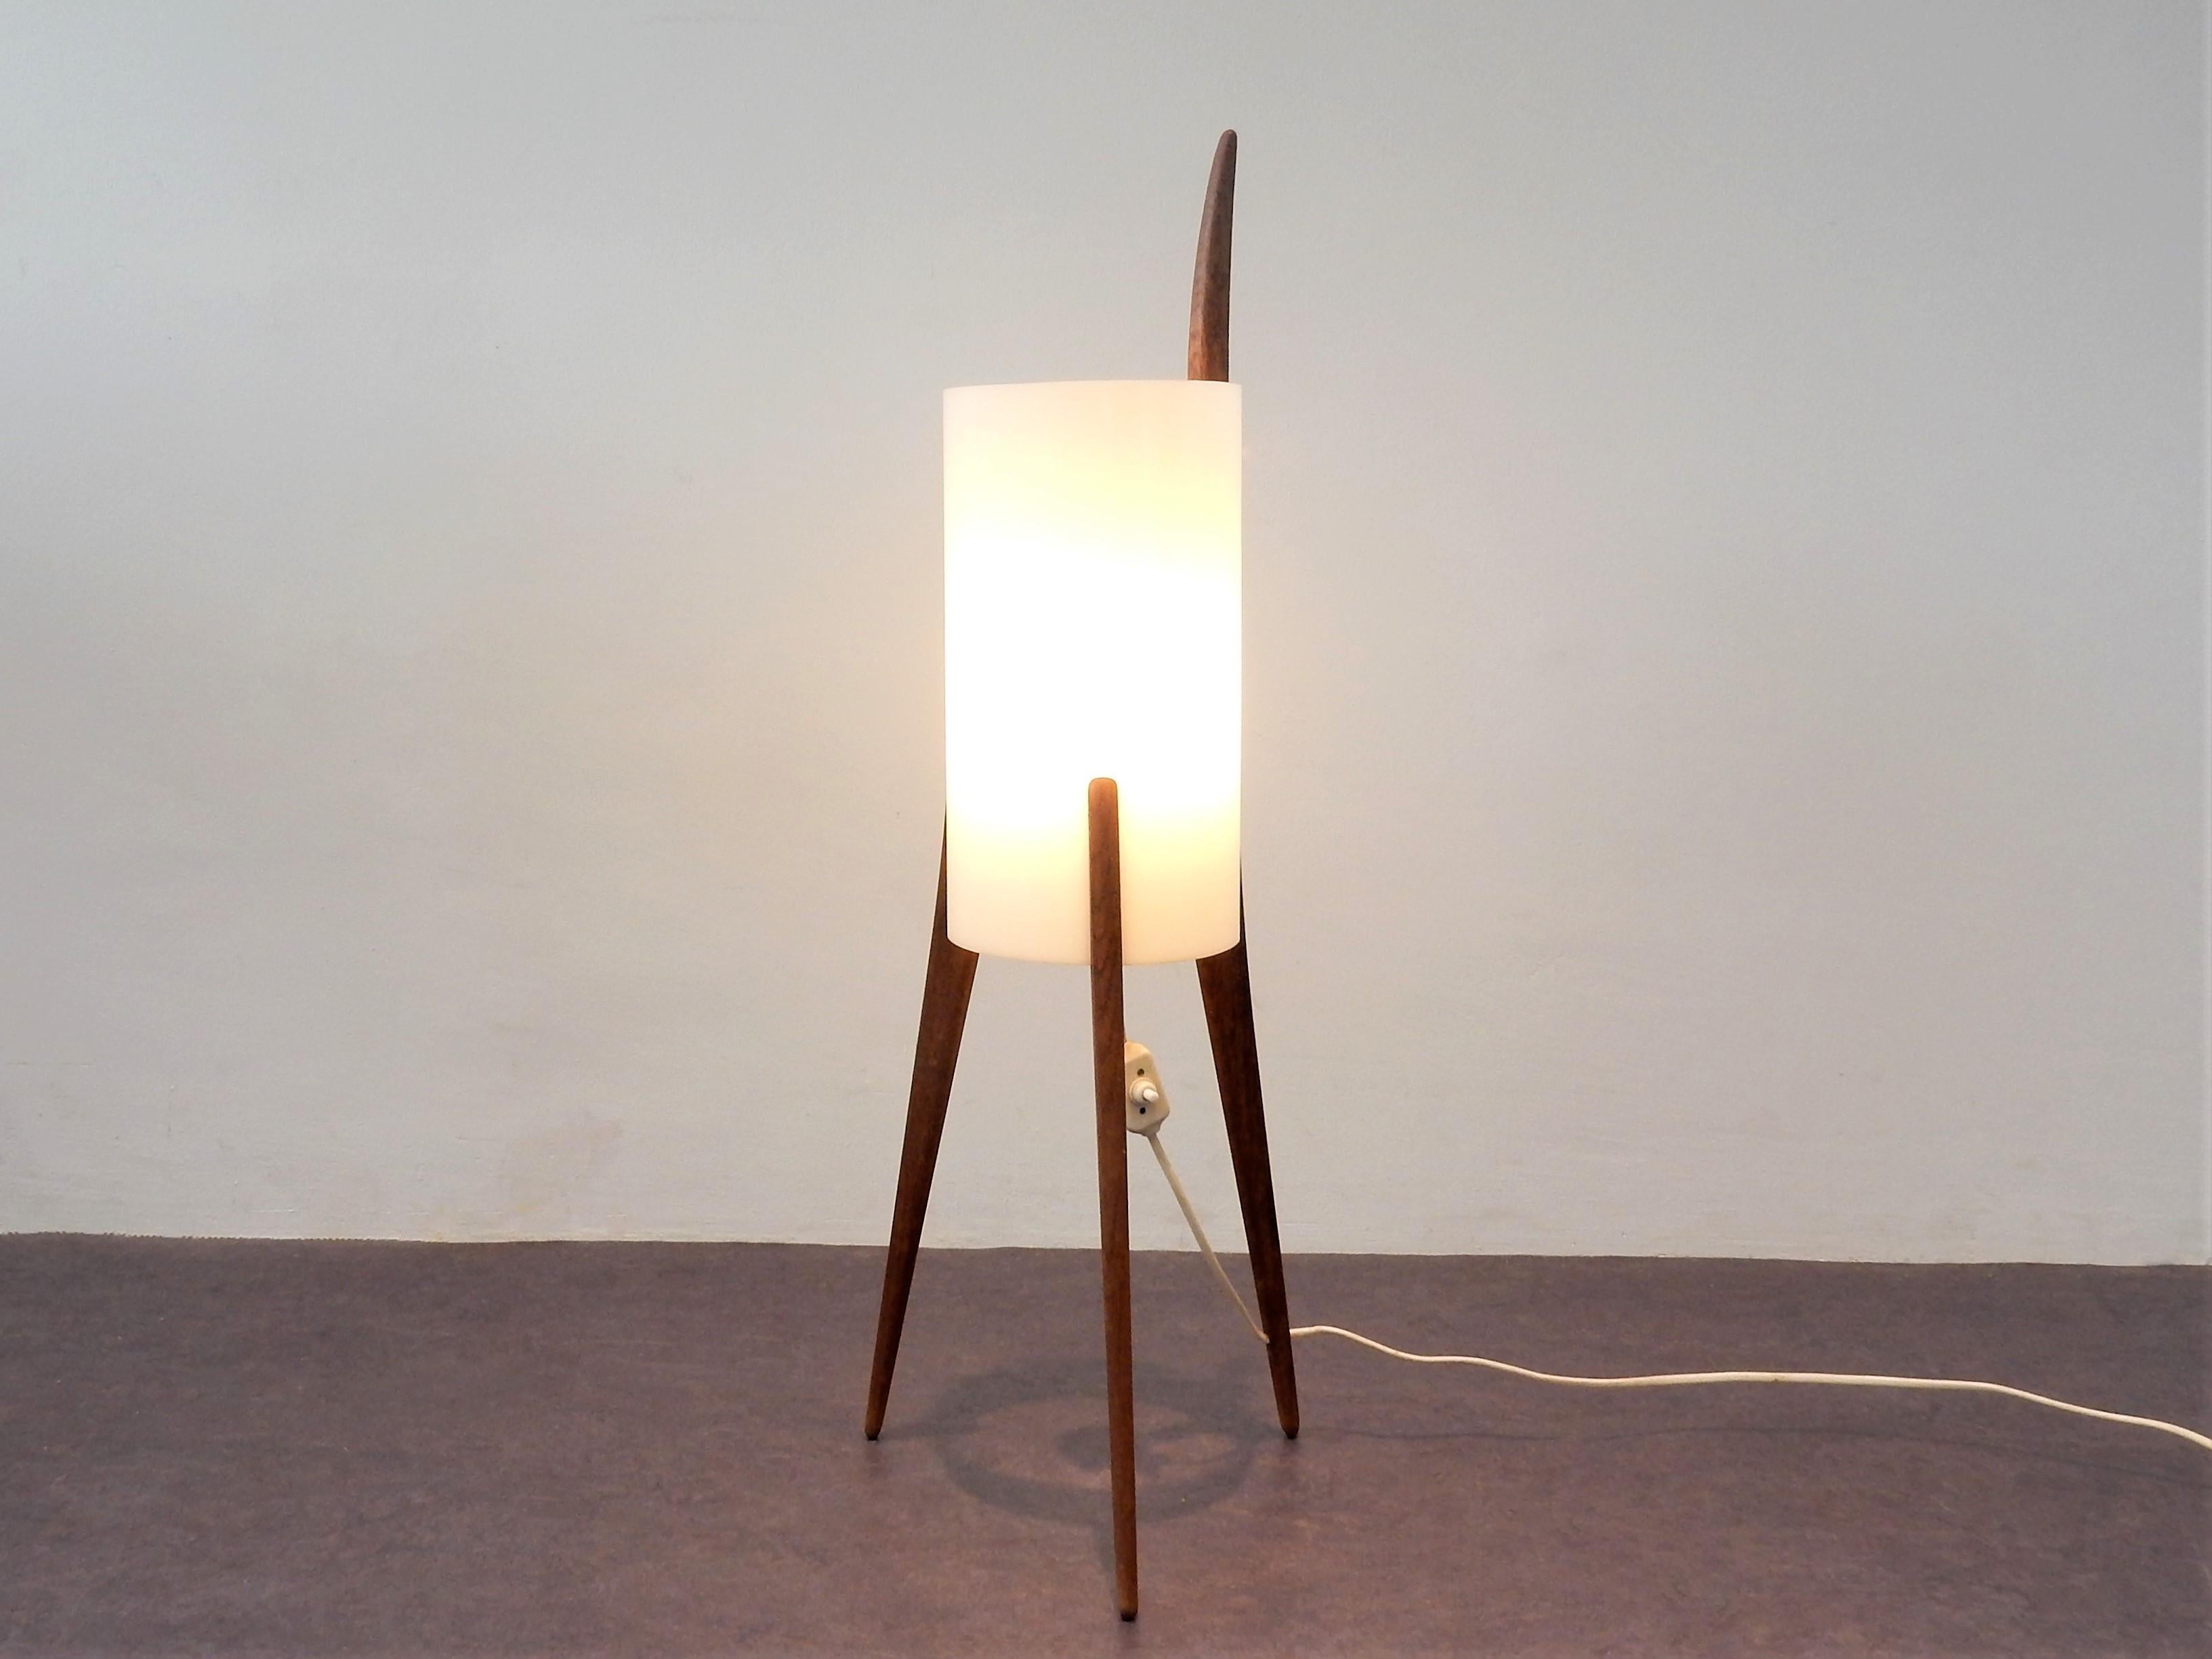 This fabulous shaped and rare floor lamp was designed by Uno & Östen Kristiansson for Luxus in the 1950's or 1960's. It has a tripod base made of oil treated oak with a Plexiglass tube shaped shade, that gives a beautiful soft light. The use of